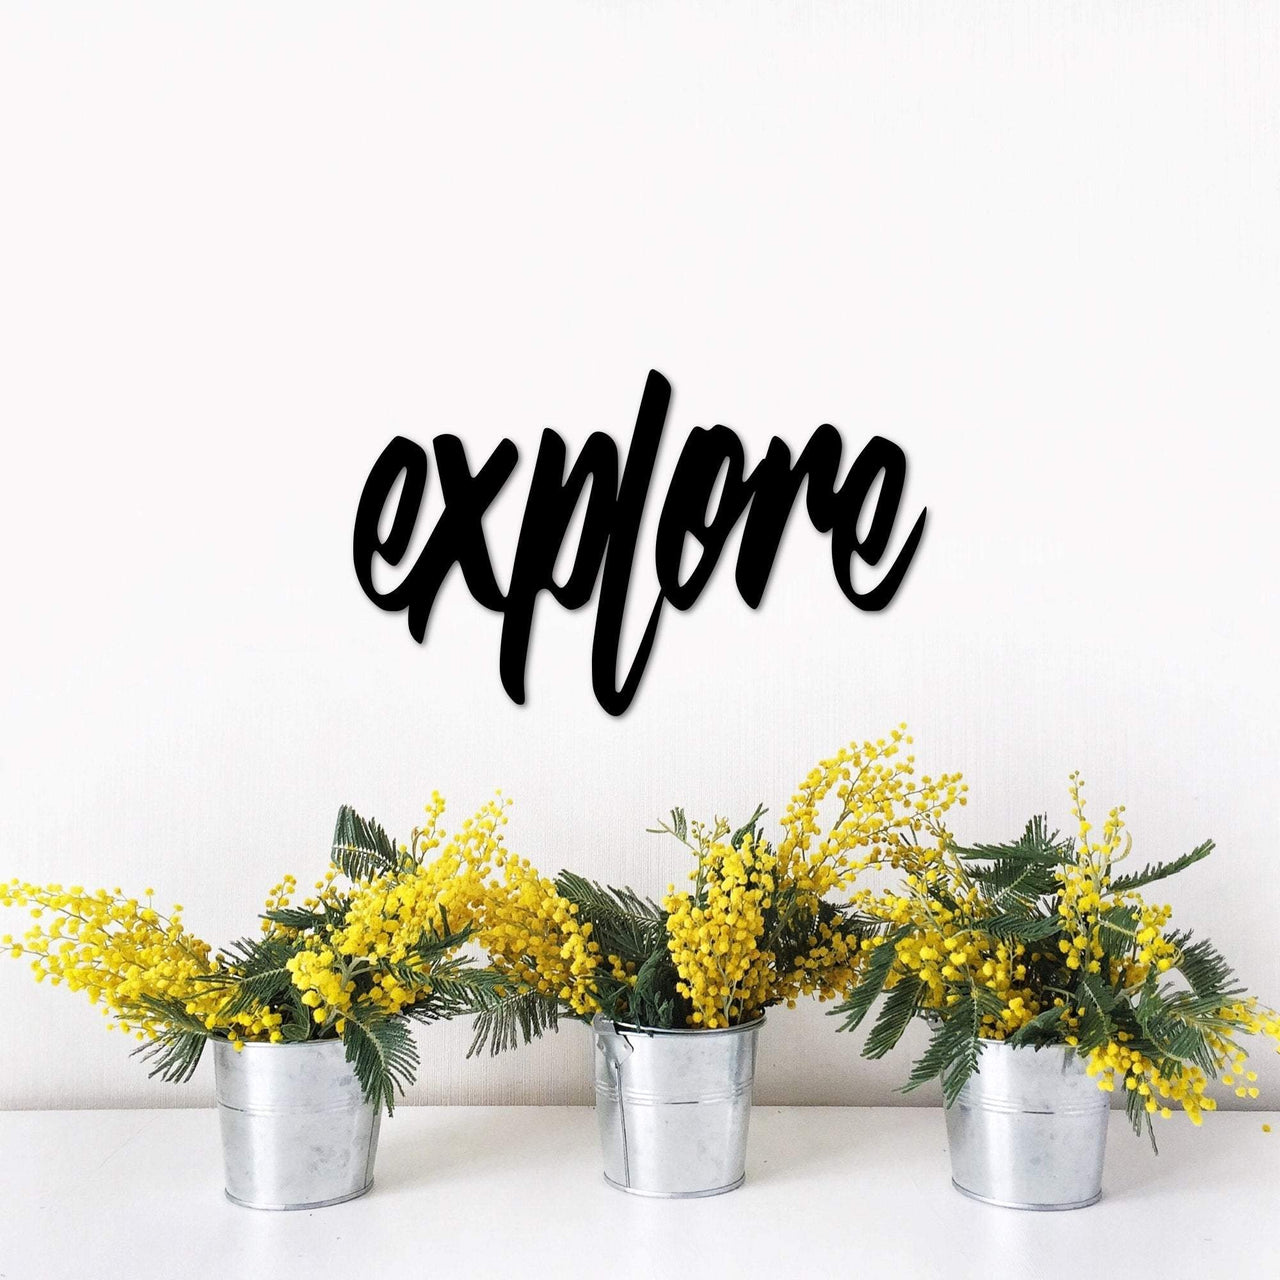 Explore Sign | Metal Wall Art | Travel Sign | Adventure Decor | Travel Gift | Explore Decor | Metal Wall Words for the Wall | Memory Decor